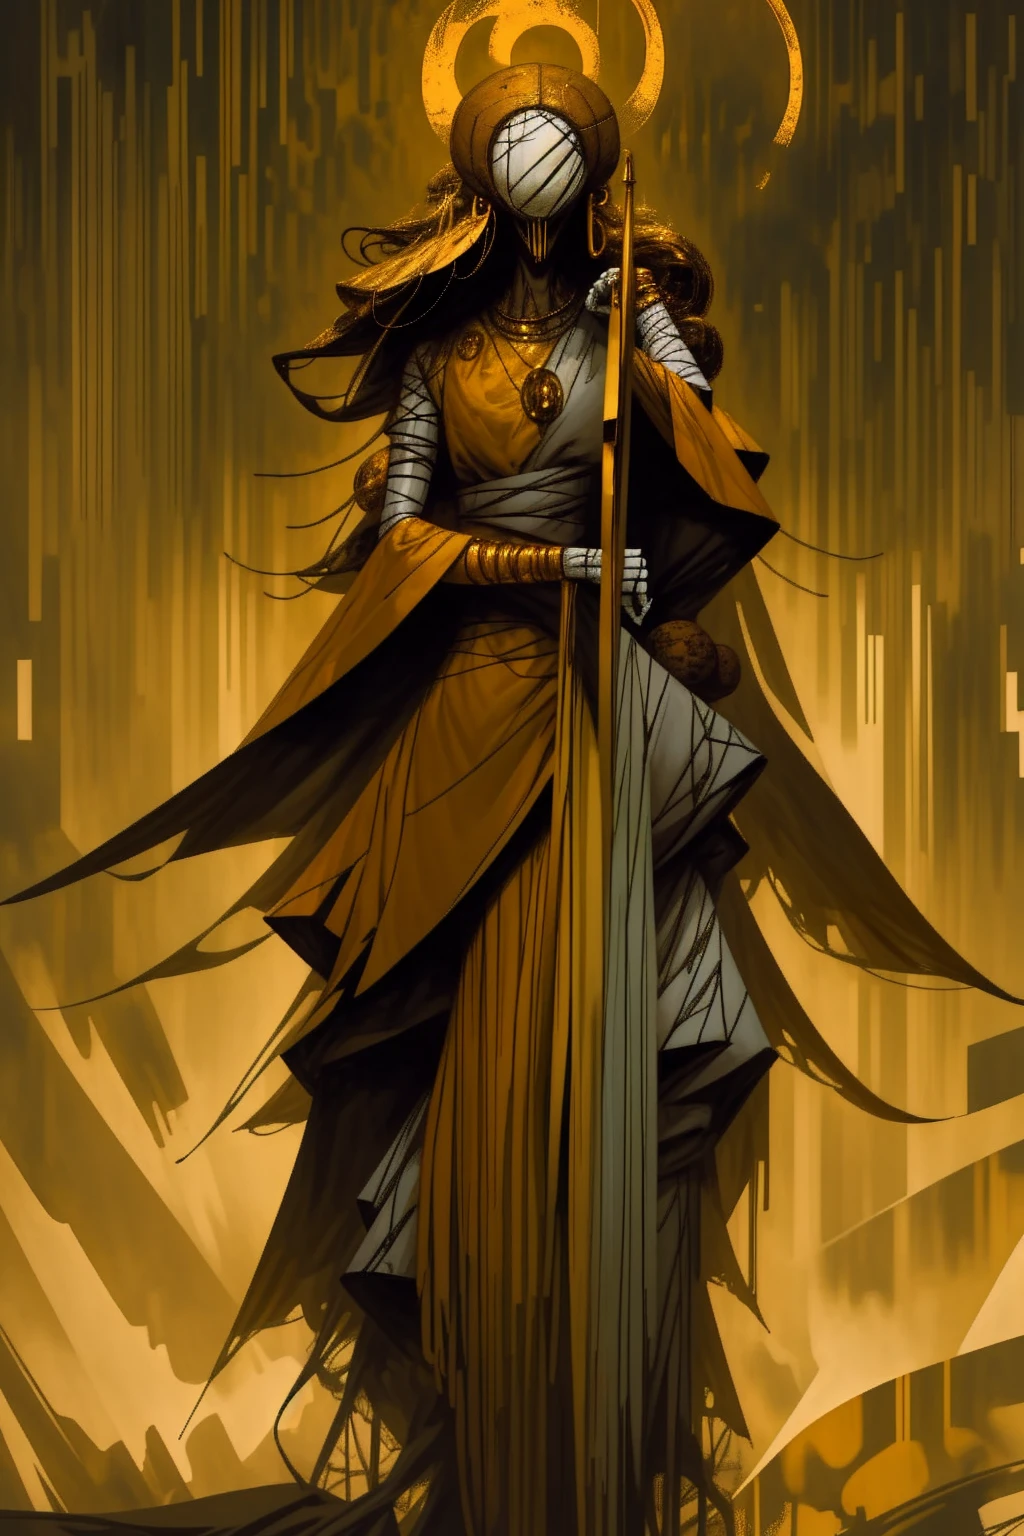 a tall menacing figure, wide shoulders, frail body, gaunt, body is withering/decaying, covered head to toe in a tattered yellow cloak, tattered yellow hood over the head, scrappy yellow veil hanging over entire face, face completely (concealed), old yellow stained bandage wraps loosely cover arms, many golden bangles loosely hanging off both forearms, covered in golden jewelry, old decrepit hands, a giant golden sunset behind them, decaying entity, flowing yellow cloak over entire body